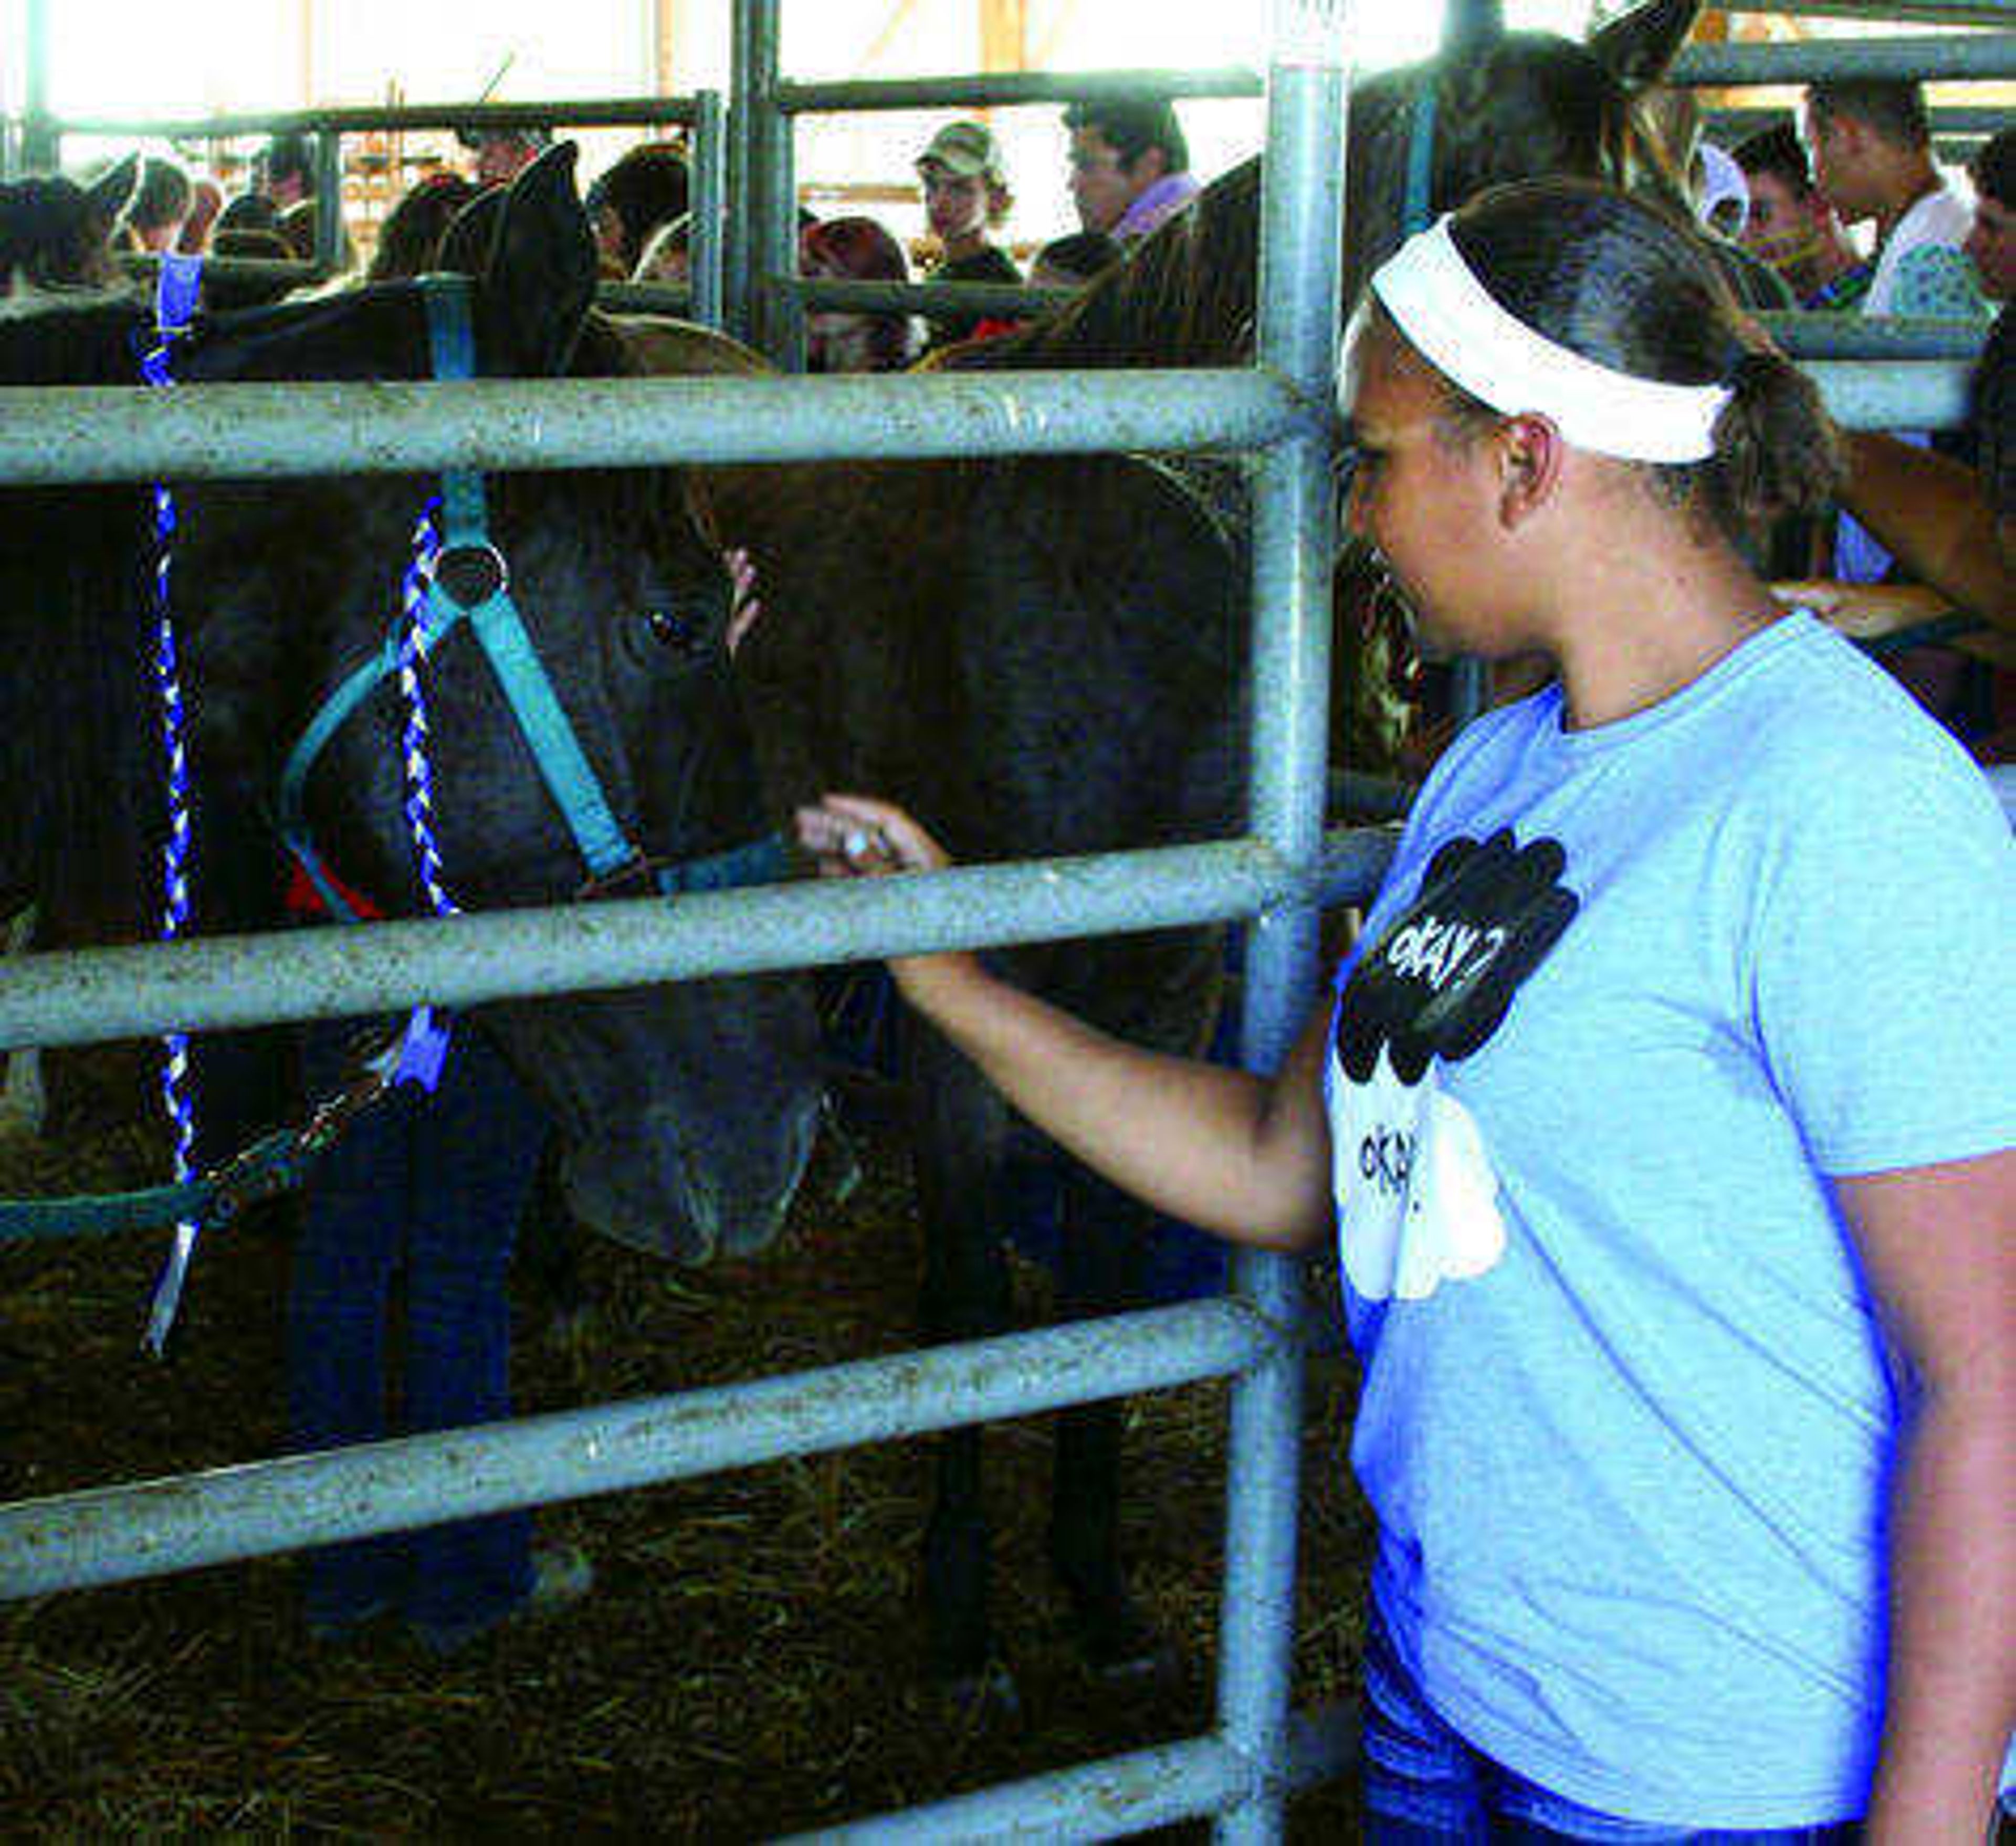 A student visits the horses at Wednesday's field day. Photo by Matt Brucker